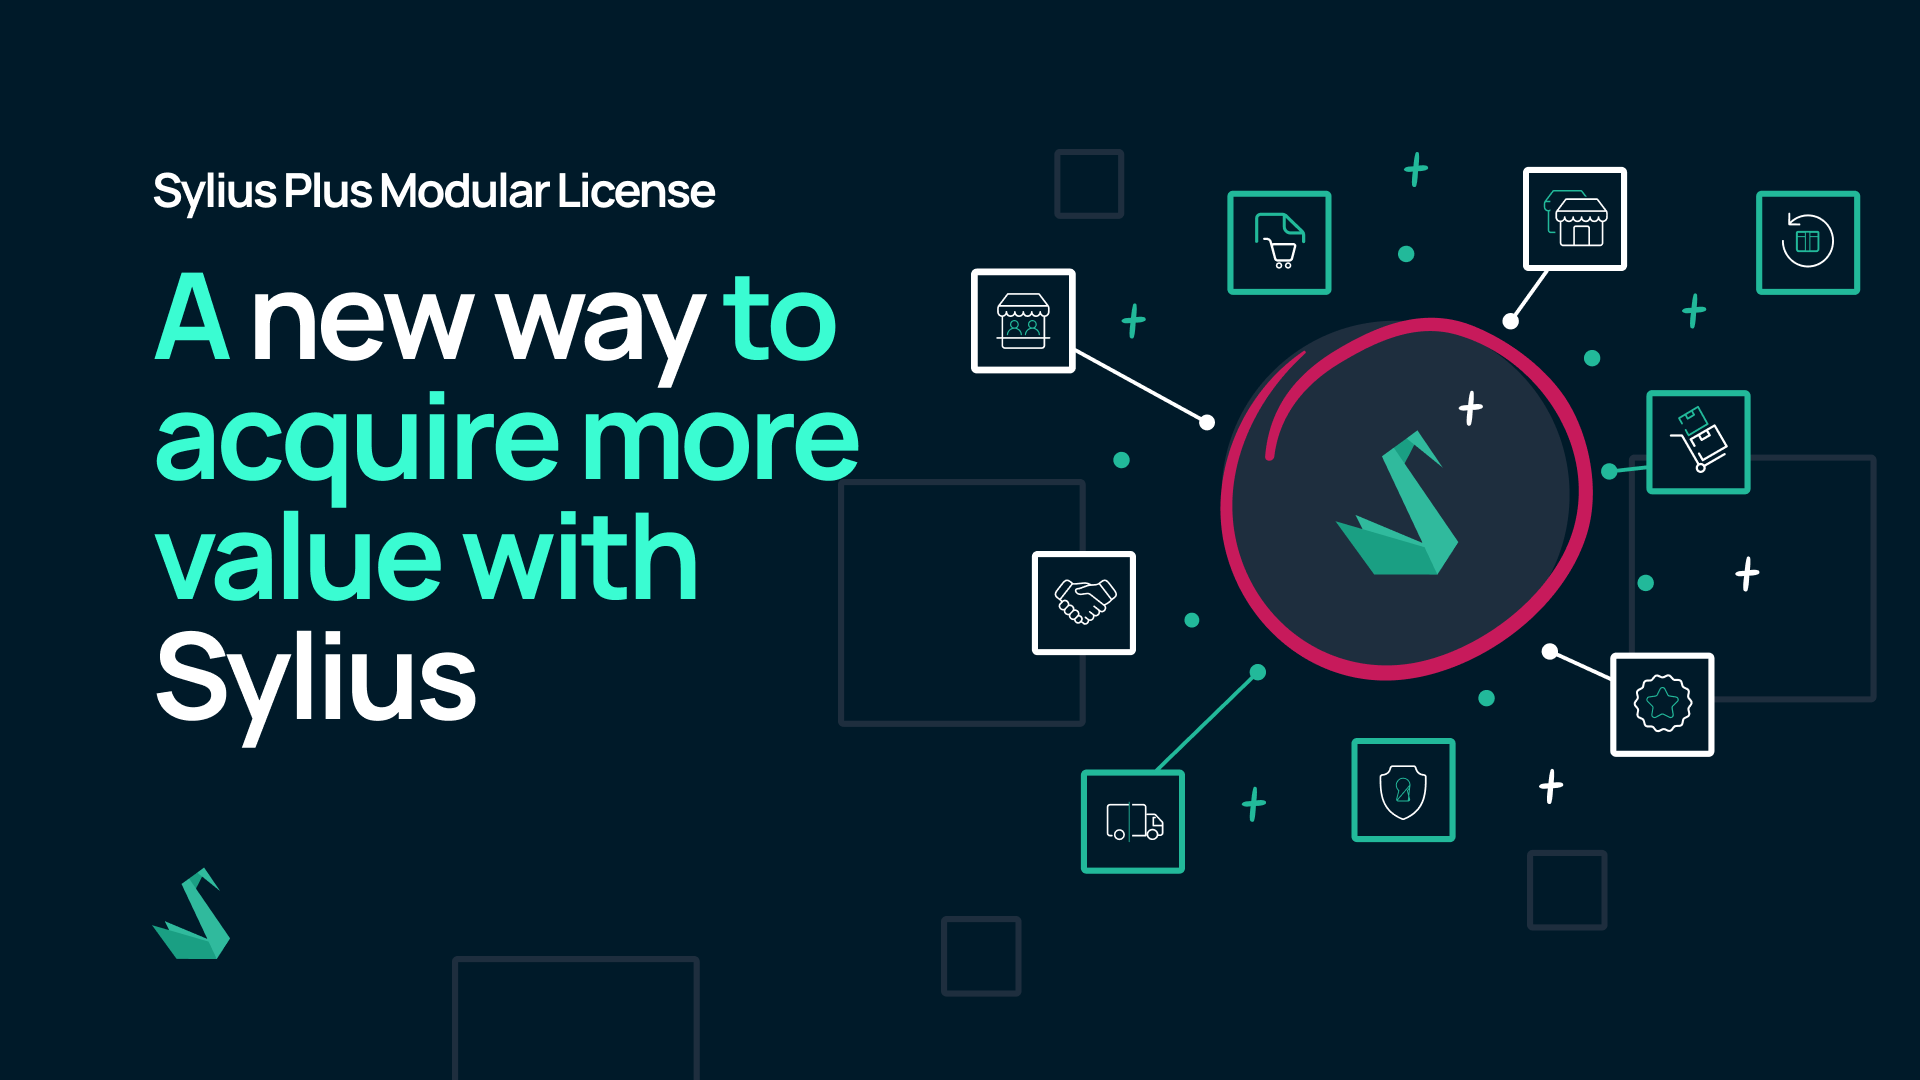 Sylius Plus Modular License – a new way to acquire more value with Sylius